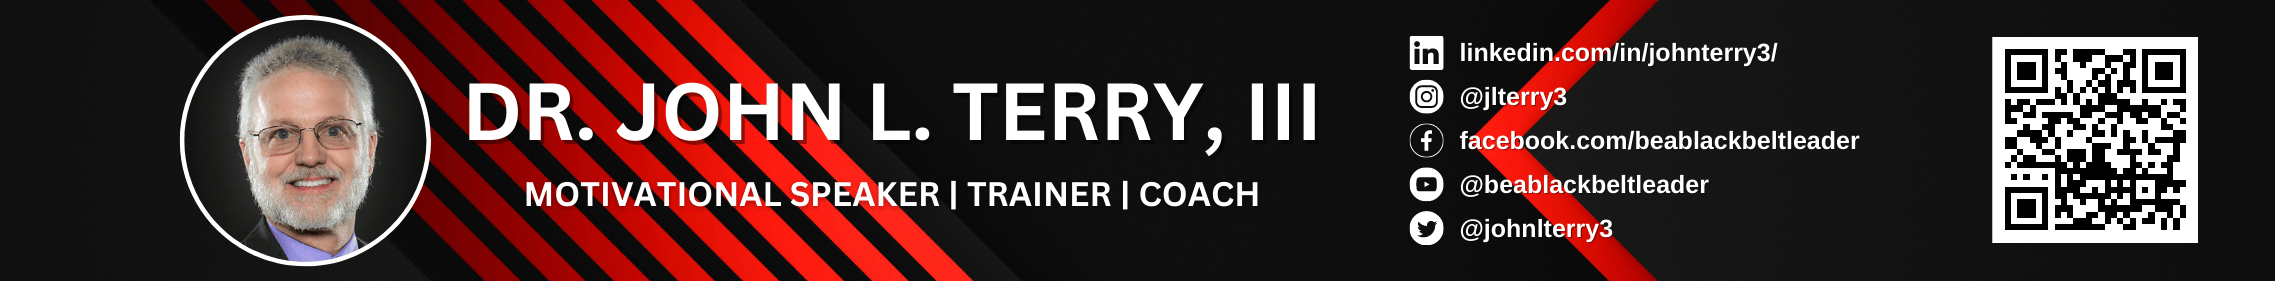 https://voiceamerica.com/shows/4160/be/guestbanner_JohnTerry.png